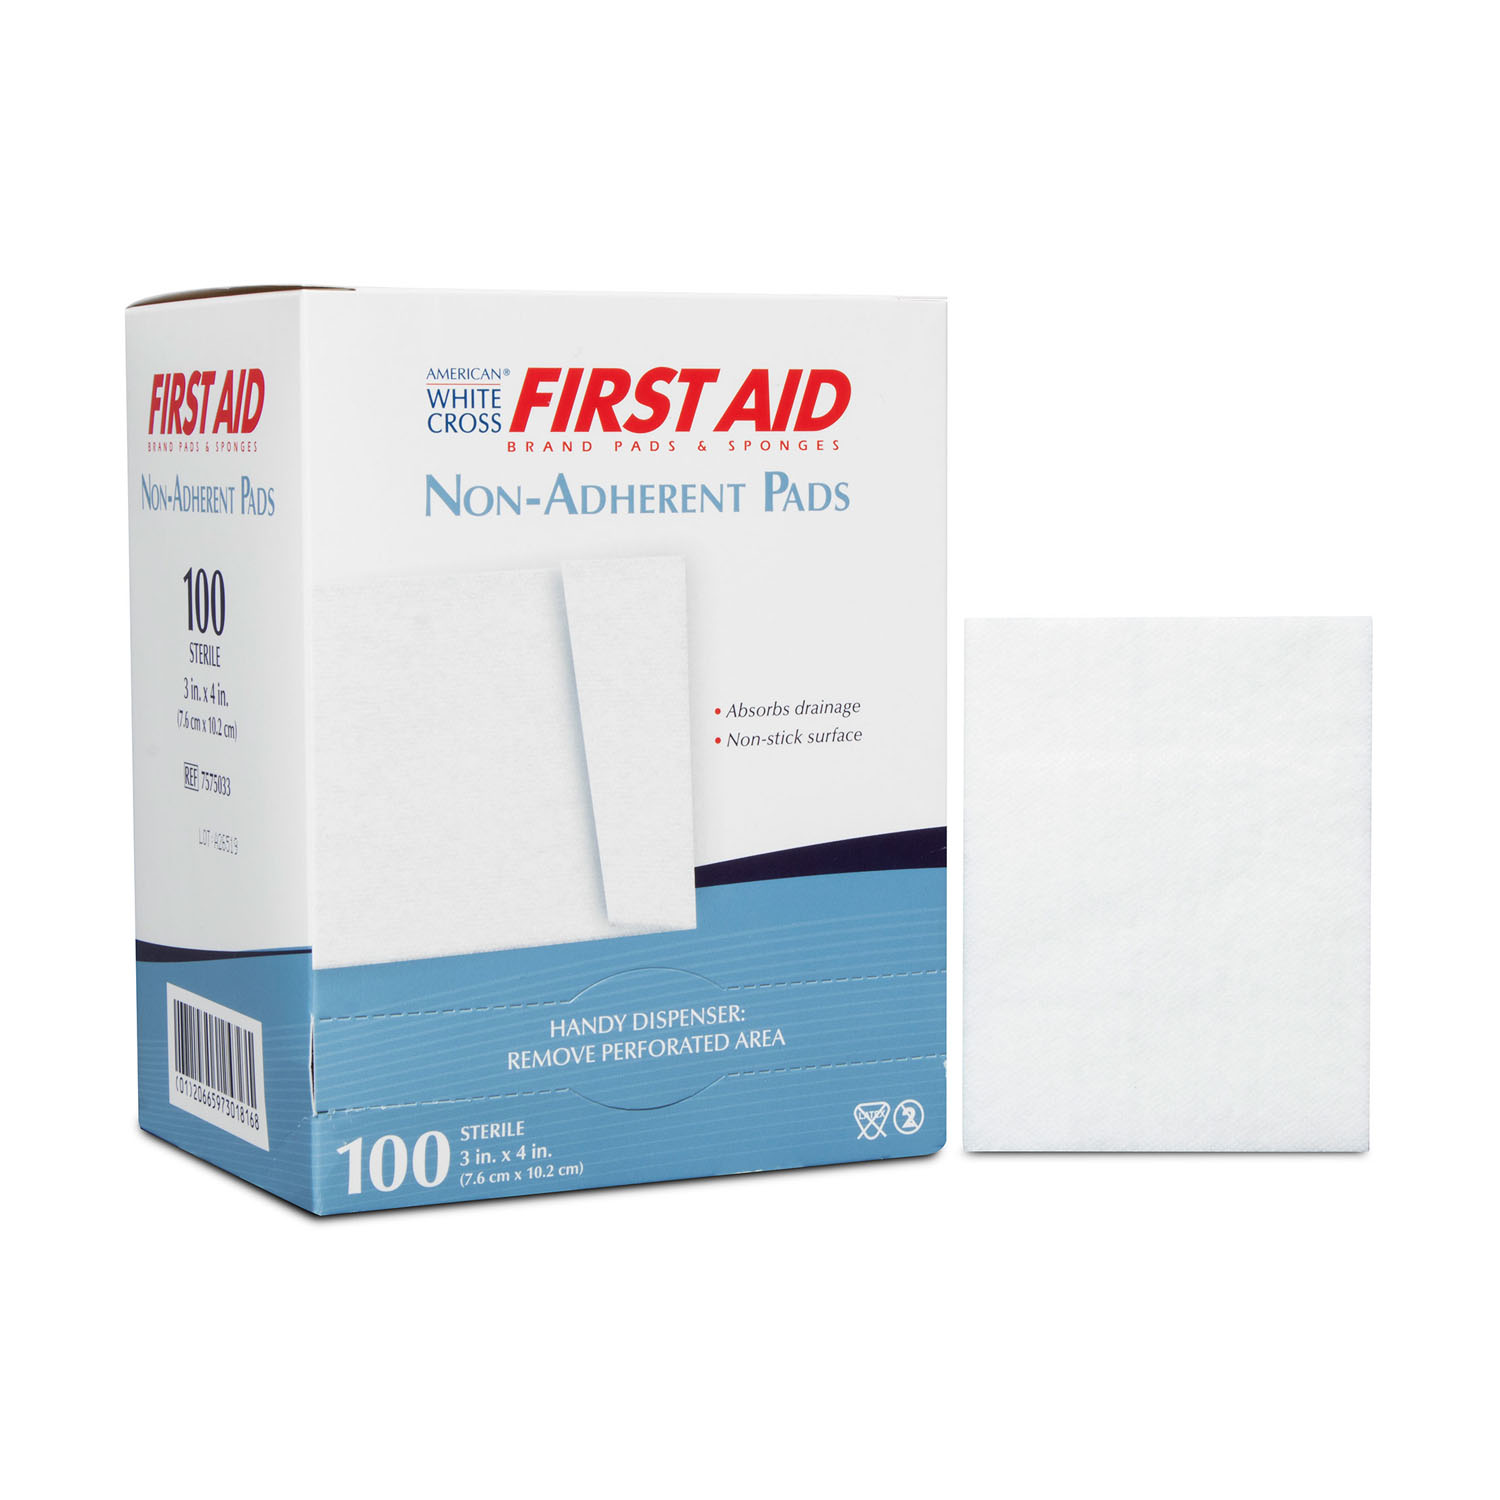 DUKAL NON-ADHERENT STERILE PADS : 7575033 CS $106.29 Stocked